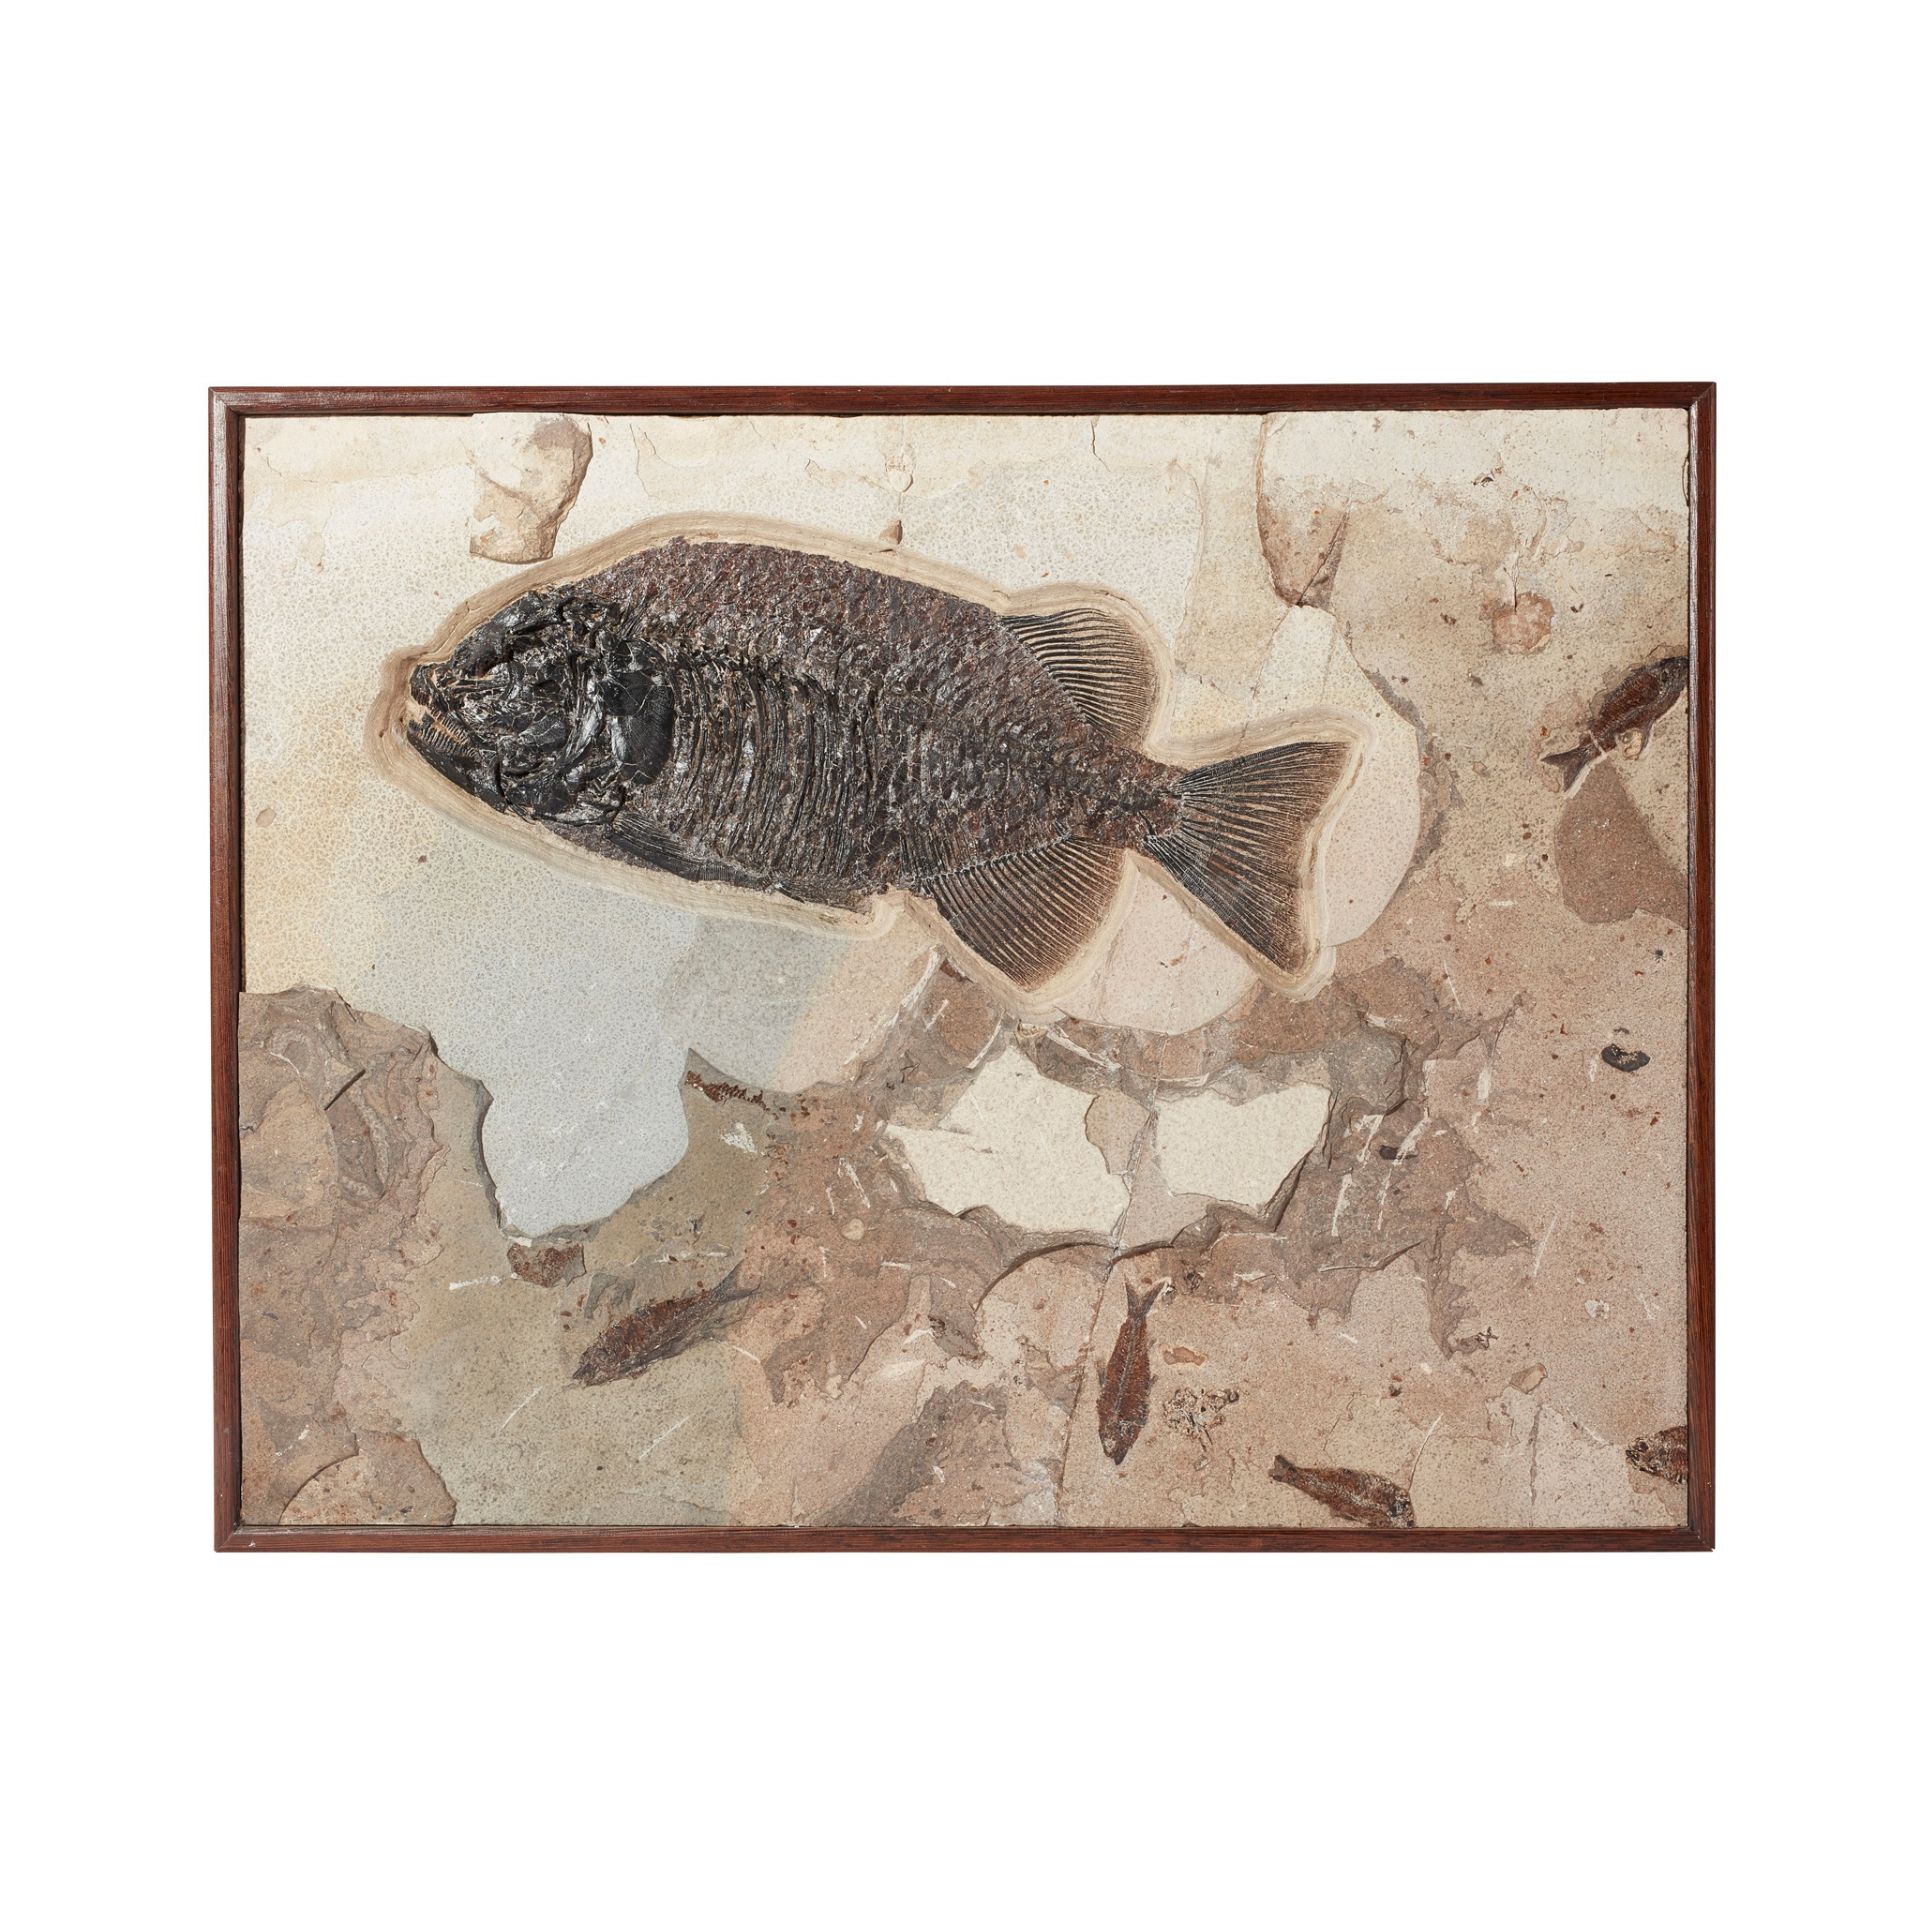 PHAREODUS FISH FOSSIL PLAQUE GREEN RIVER FORMATION, USA, LOWER EOCENE PERIOD, 50 MILLION YEARS BP